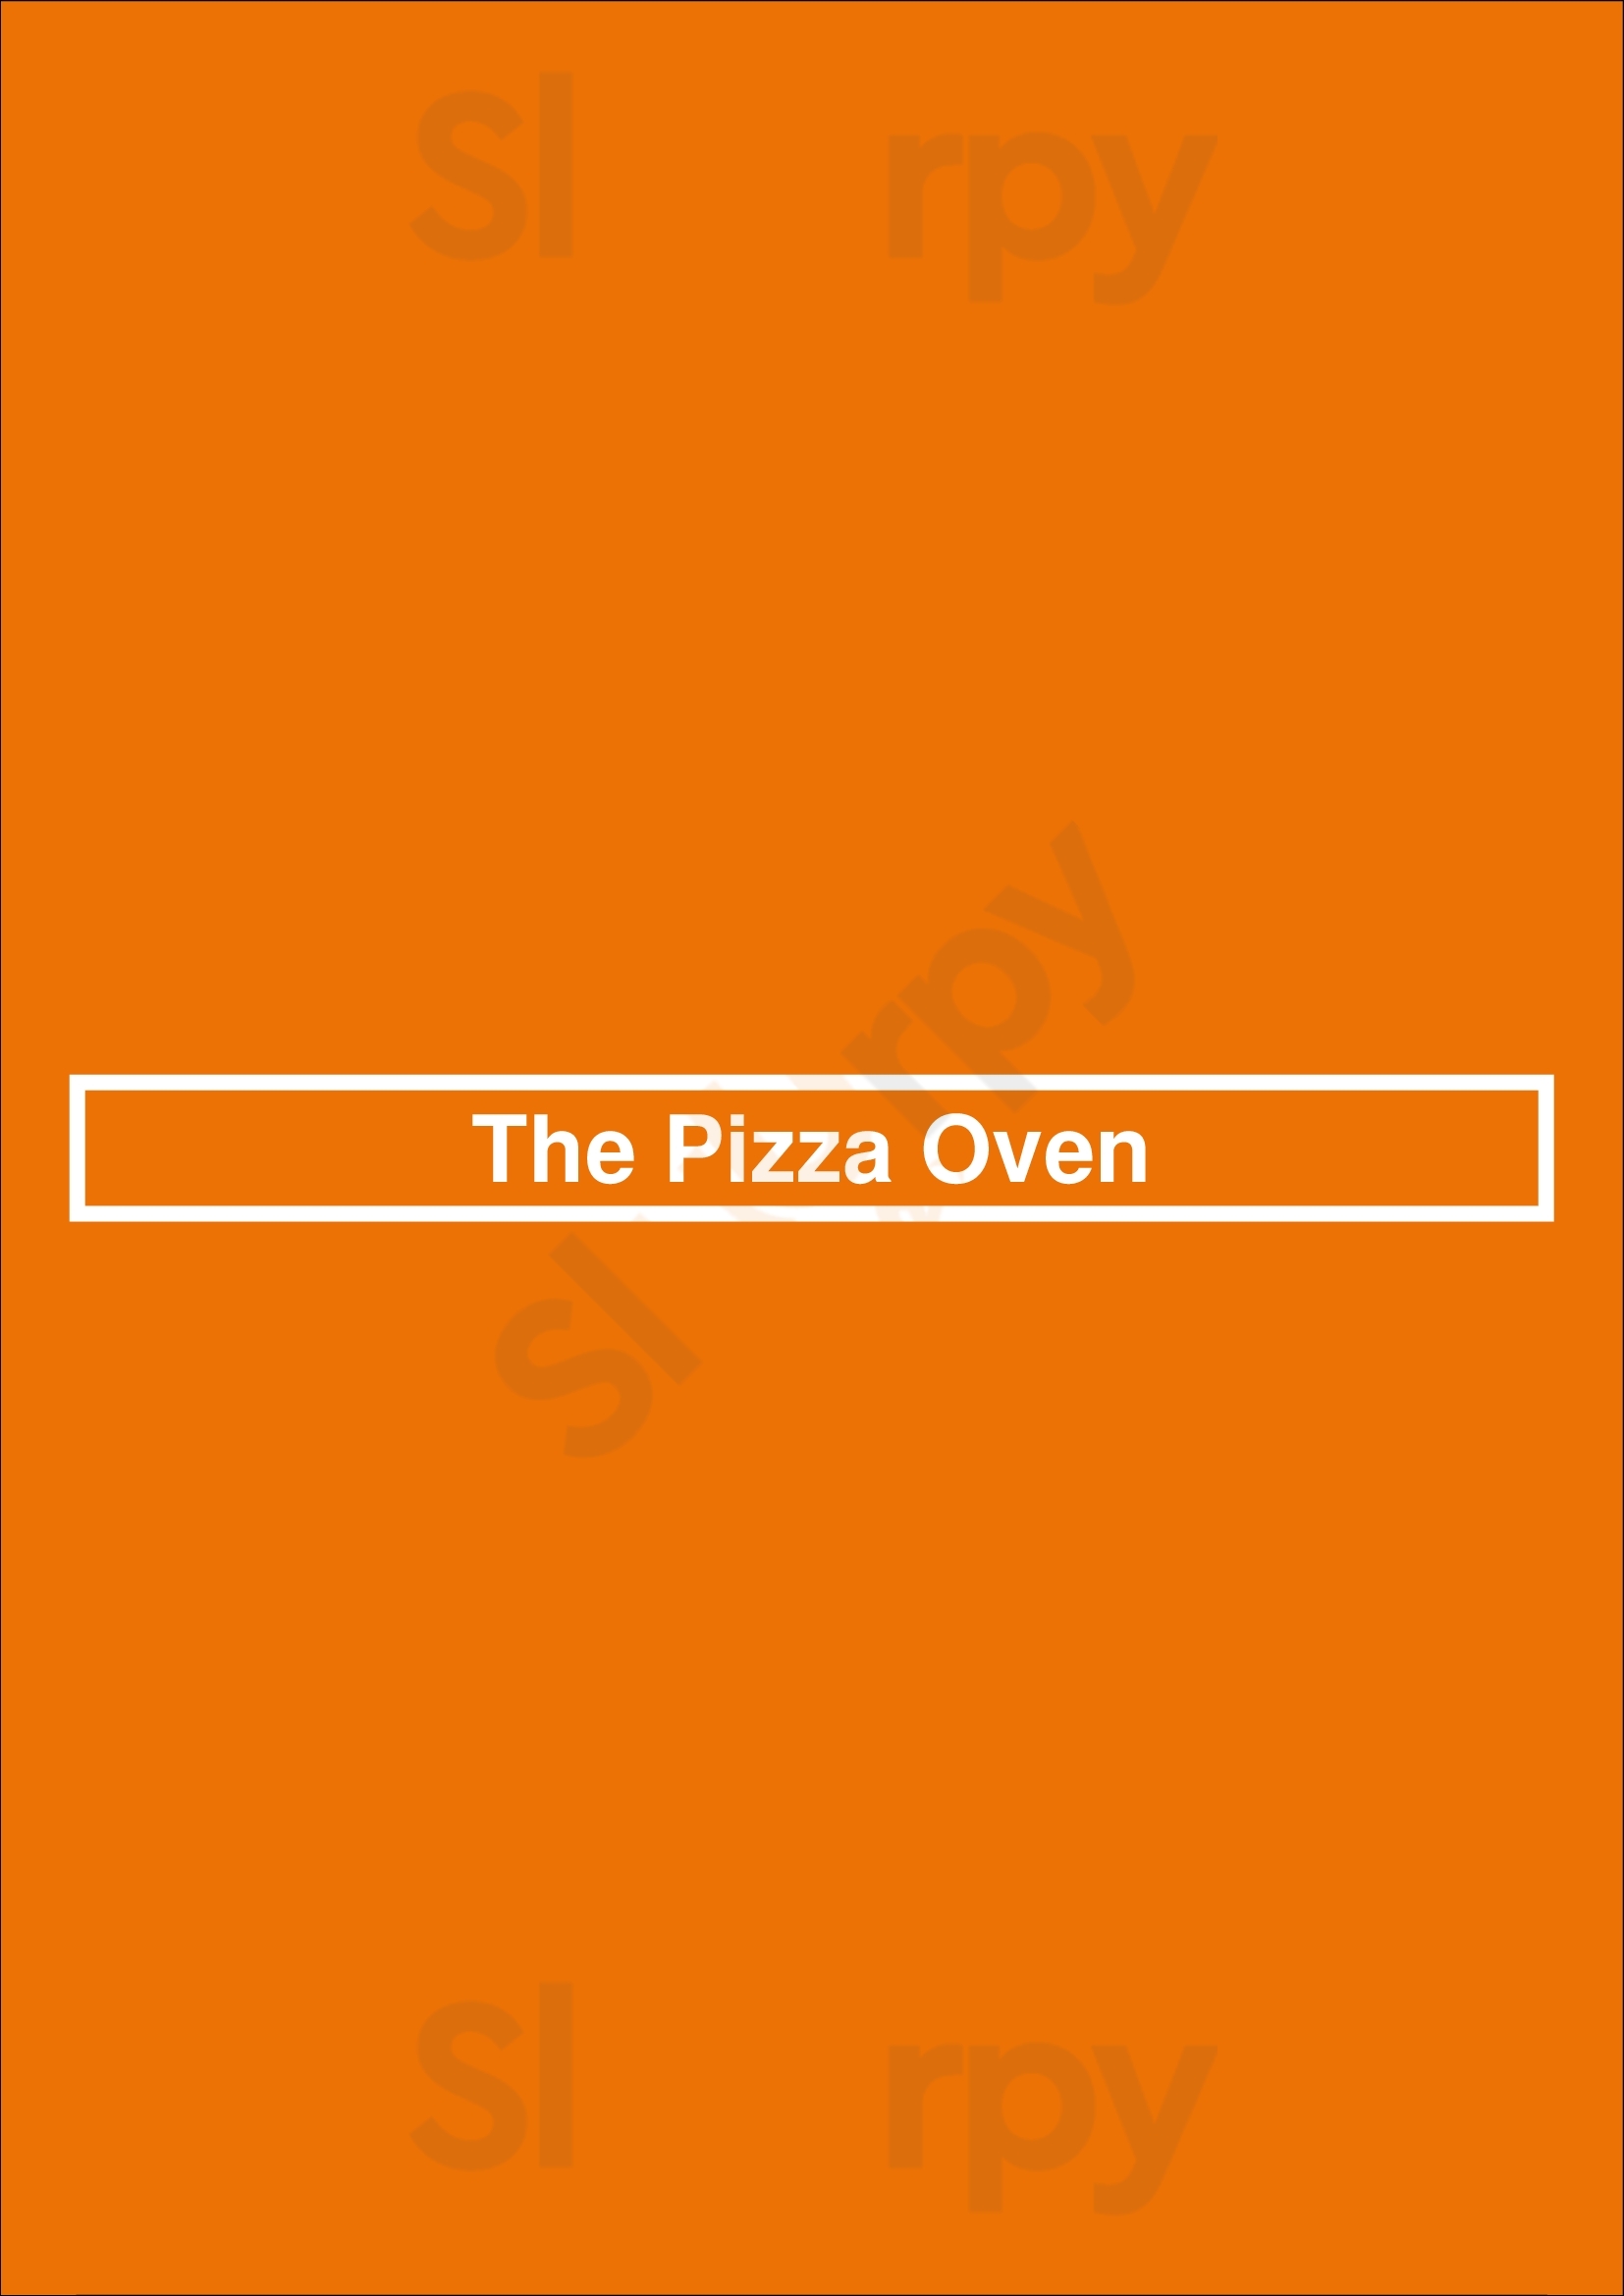 The Pizza Oven 2 Seaham Menu - 1